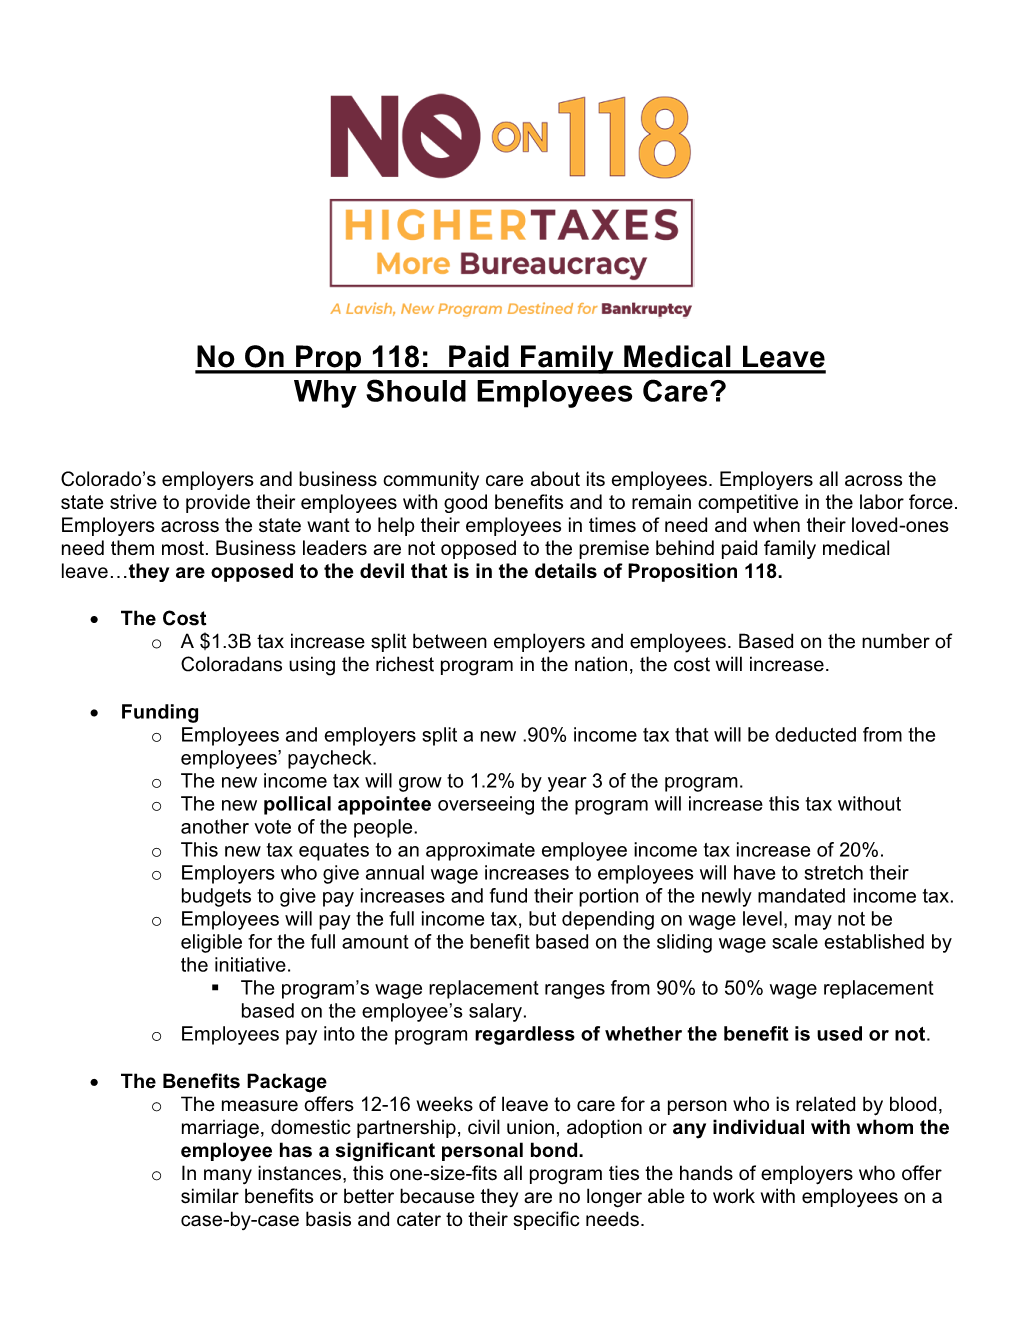 No on Prop 118: Paid Family Medical Leave Why Should Employees Care?